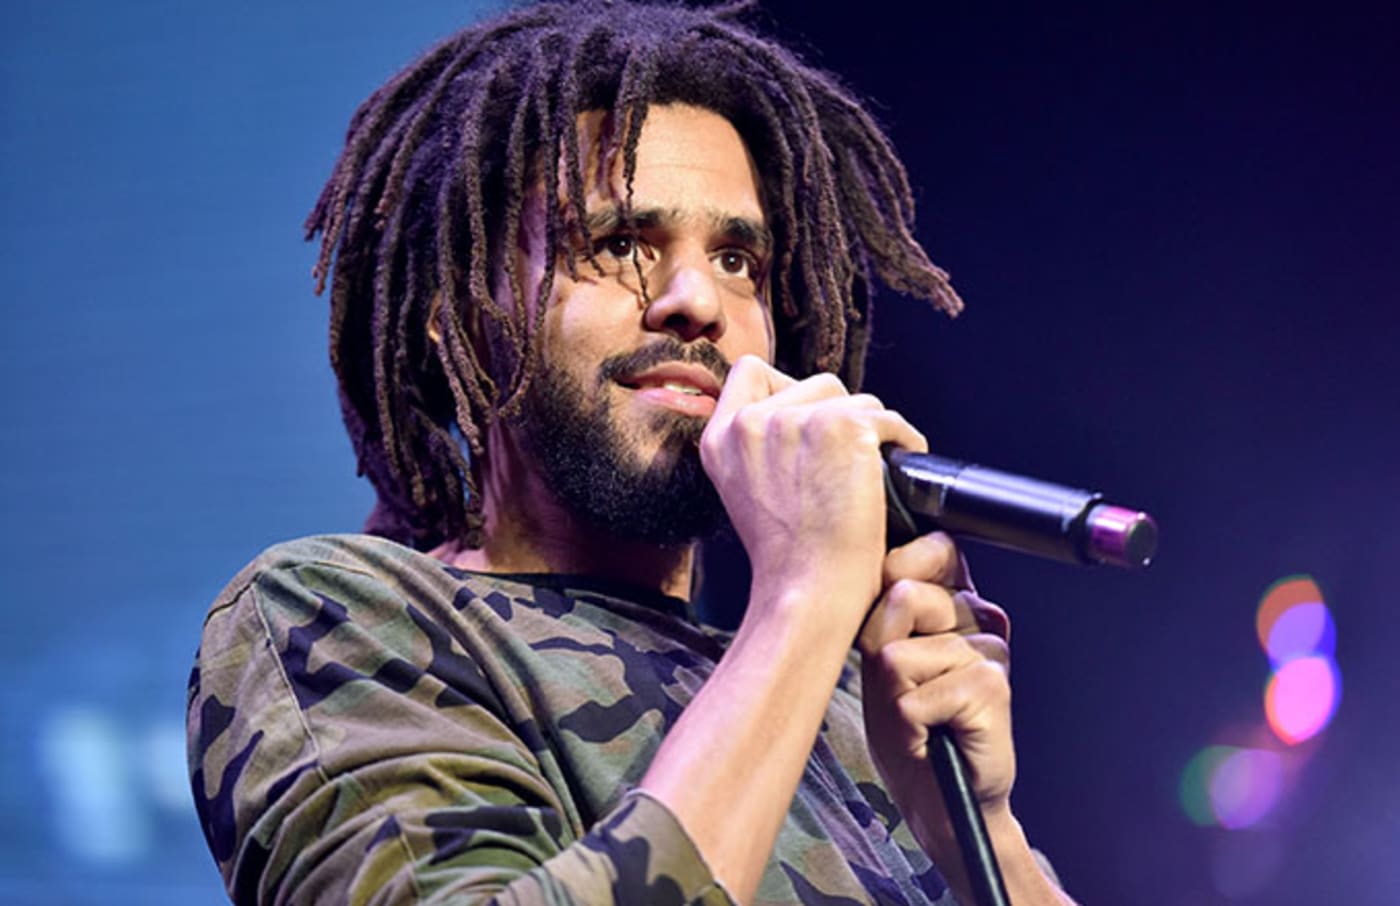 This is a photo of J. Cole.